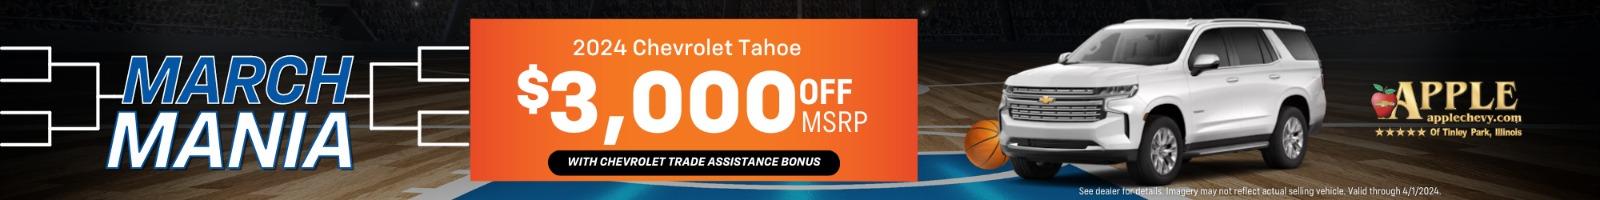 2024 Chevy Tahoe  $3,000 OFF MSRP